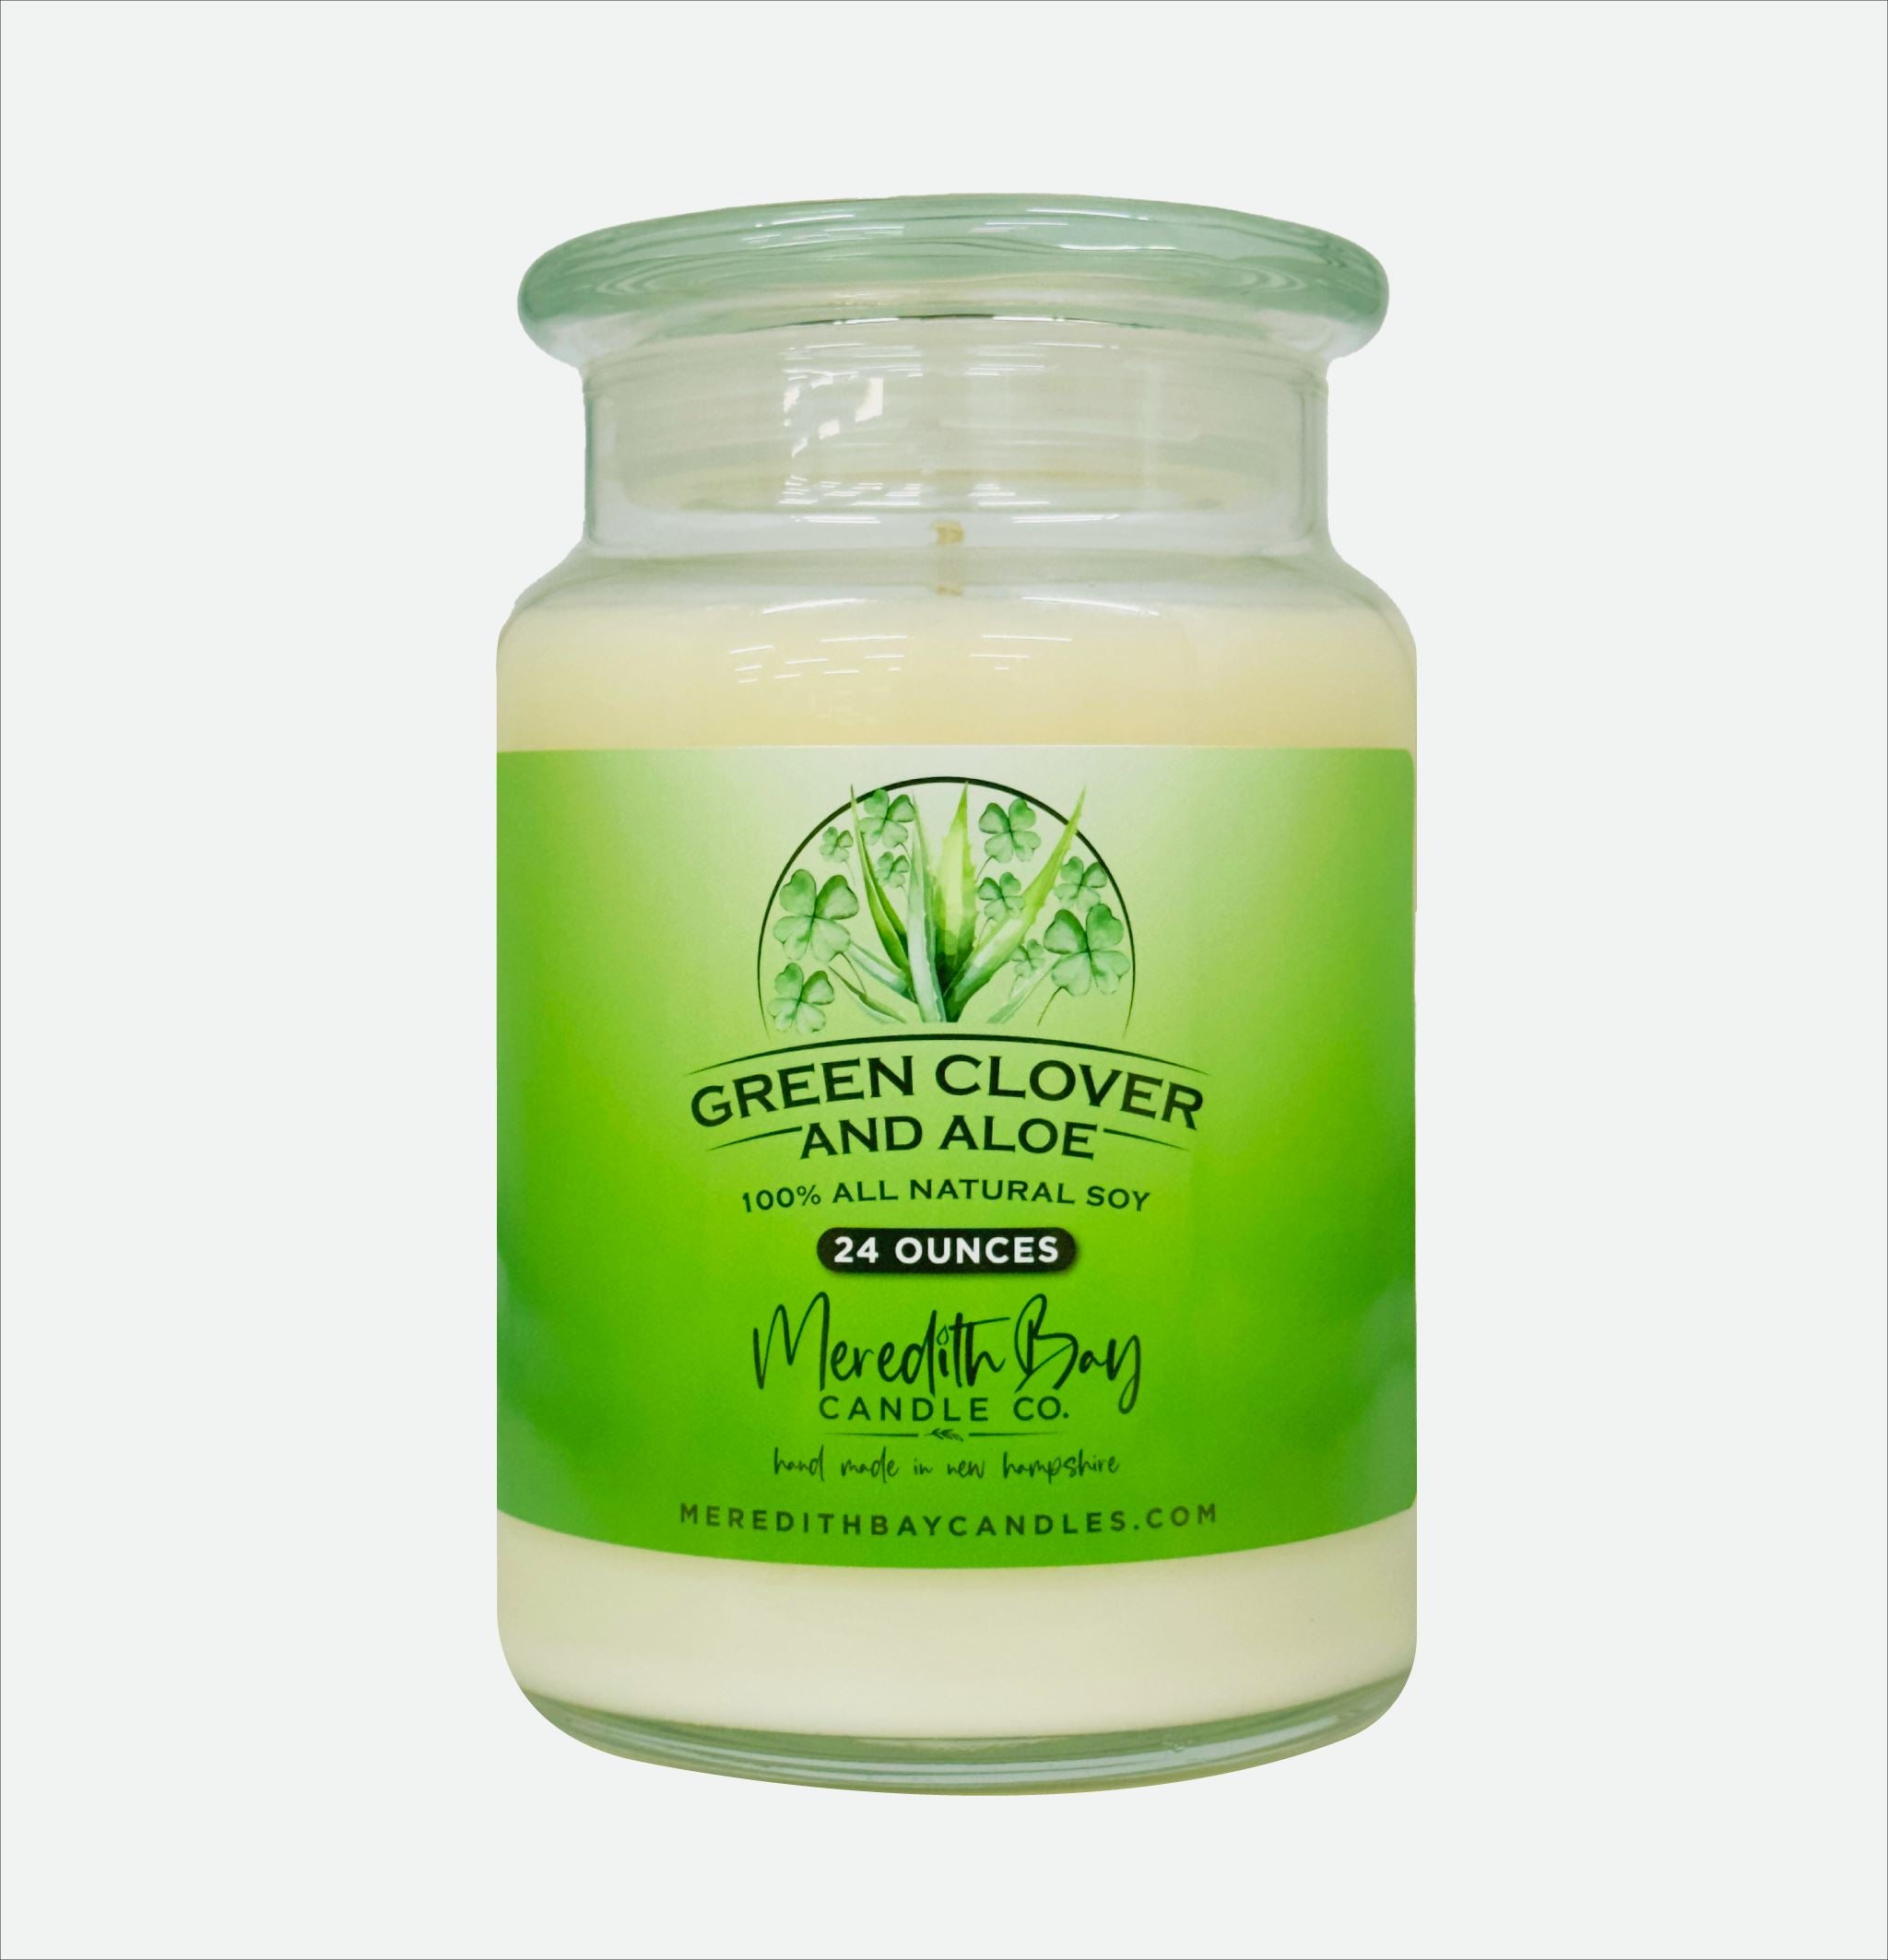 Green Clover & Aloe Soy Candle Meredith Bay Candle Co 24 Oz 